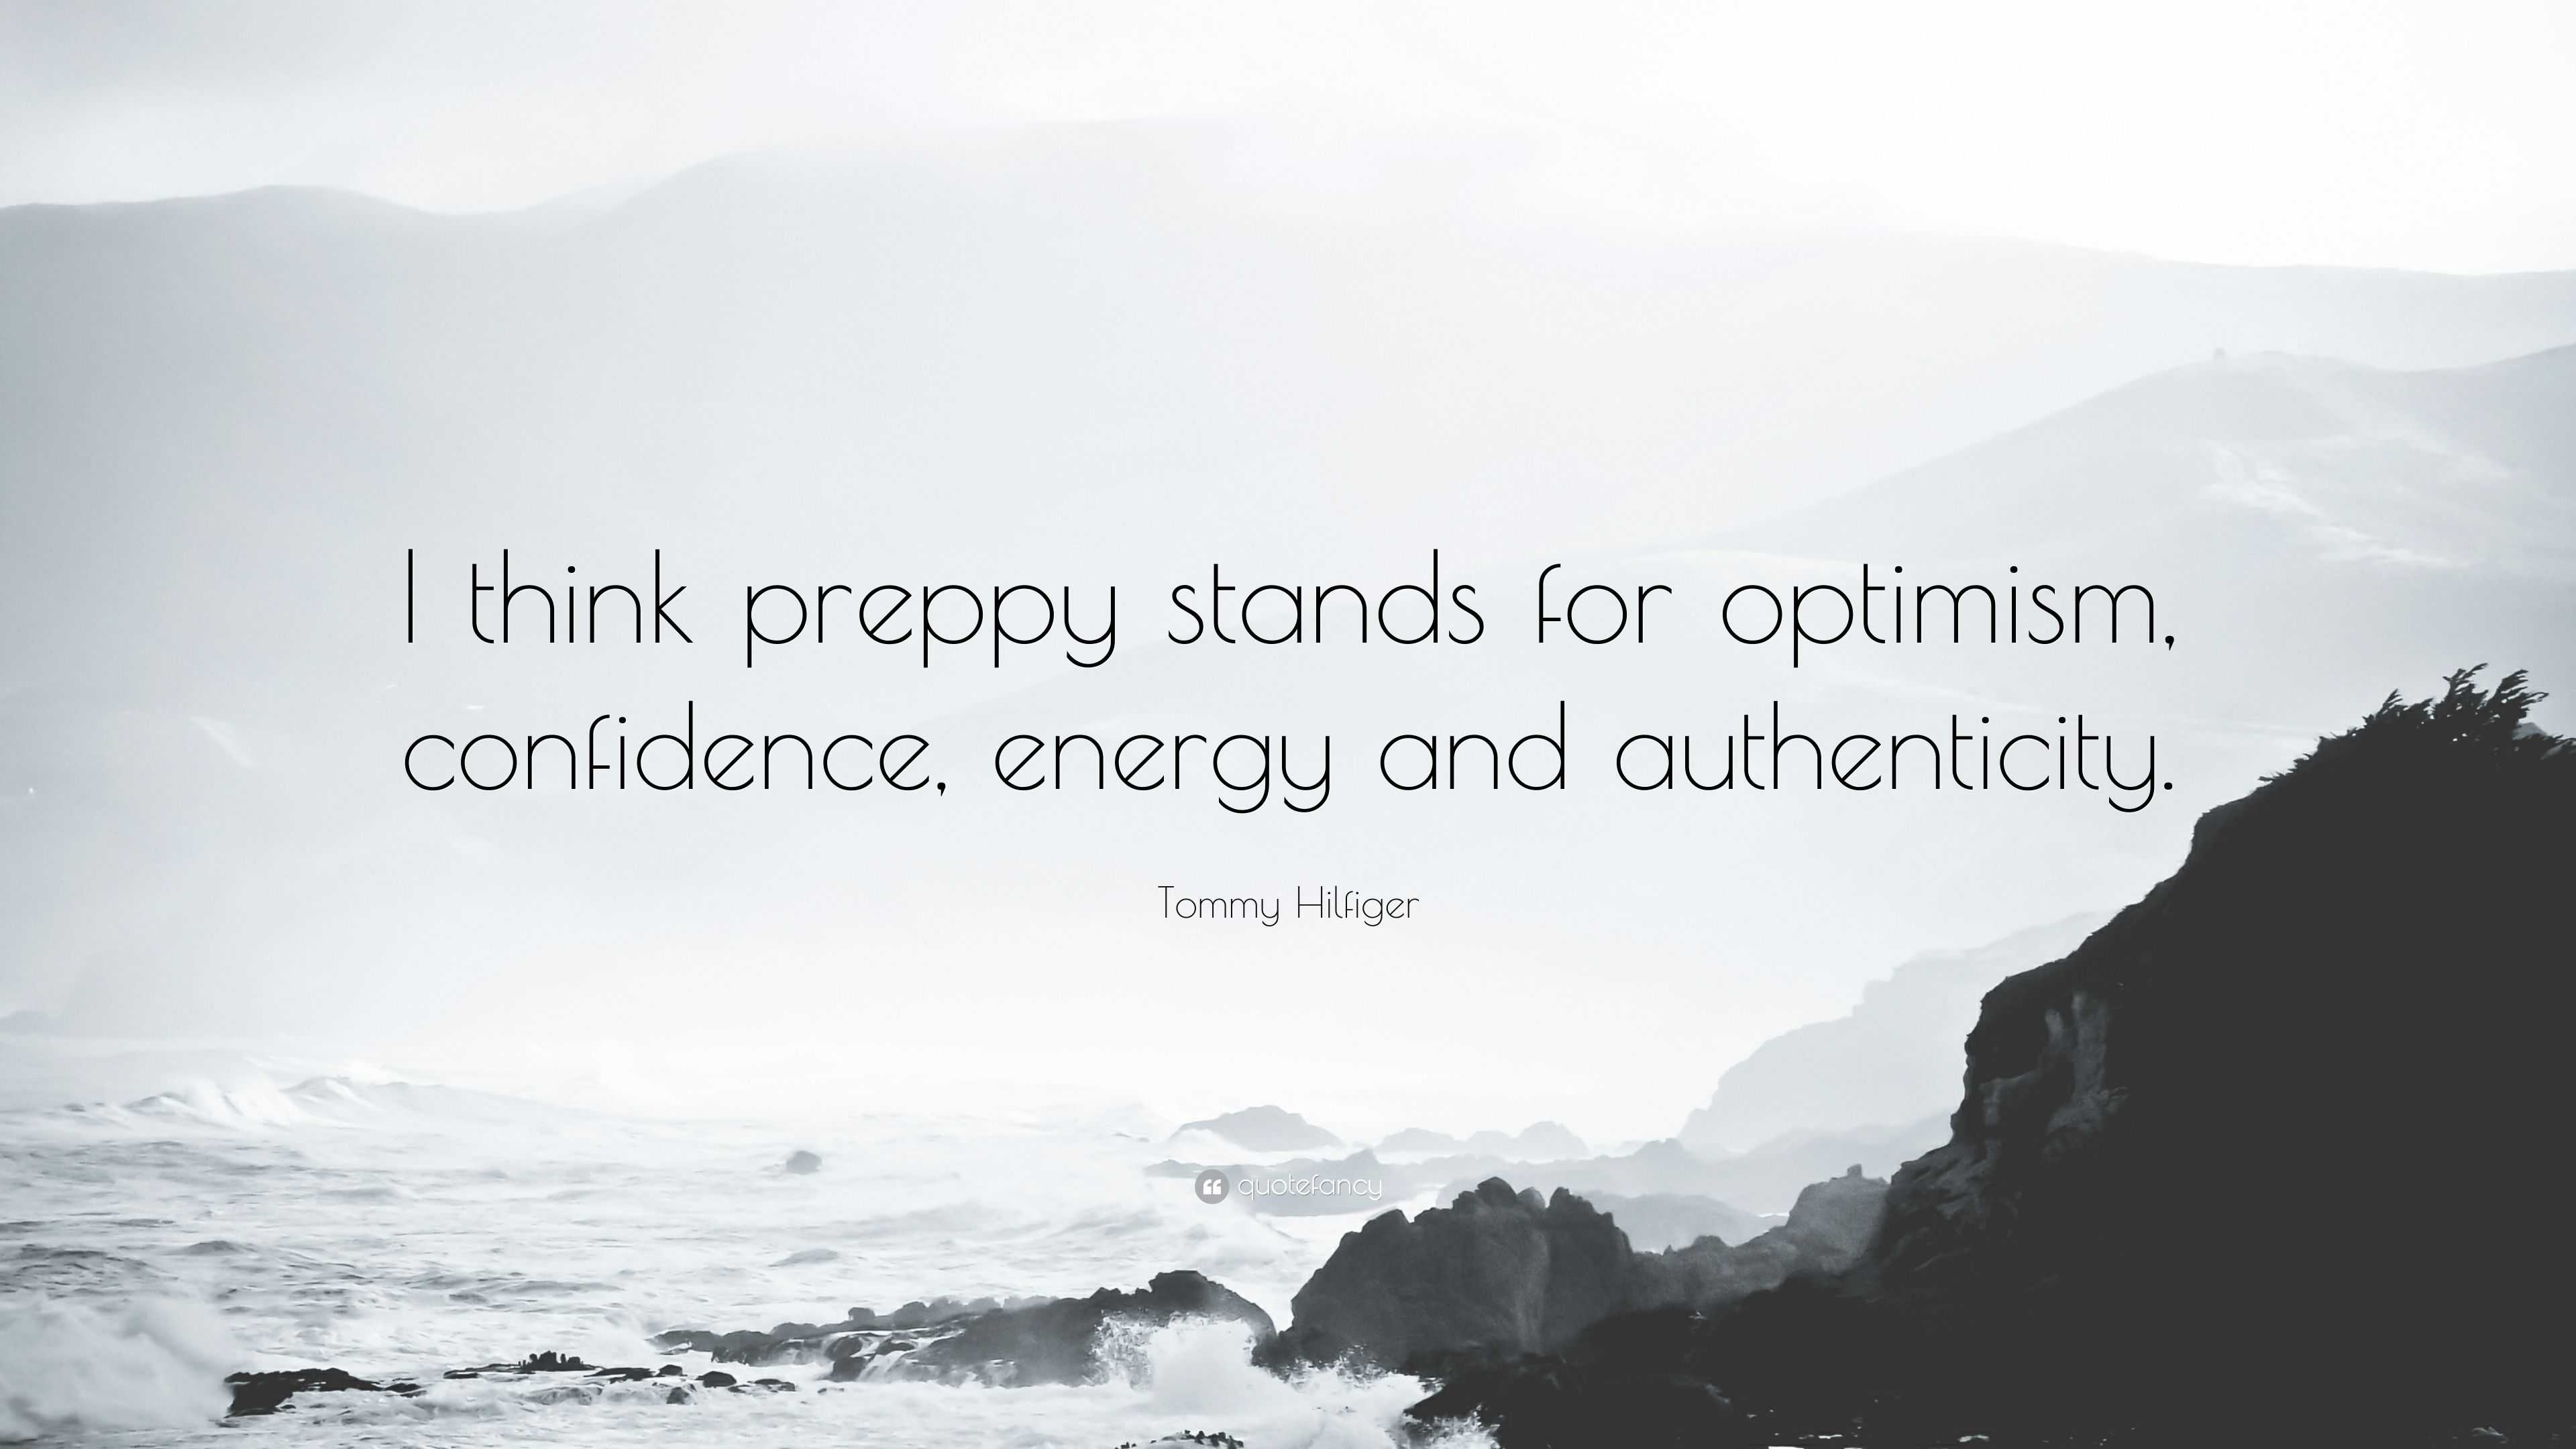 Tommy Hilfiger Quote: “I think preppy stands for optimism, confidence,  energy and authenticity.”